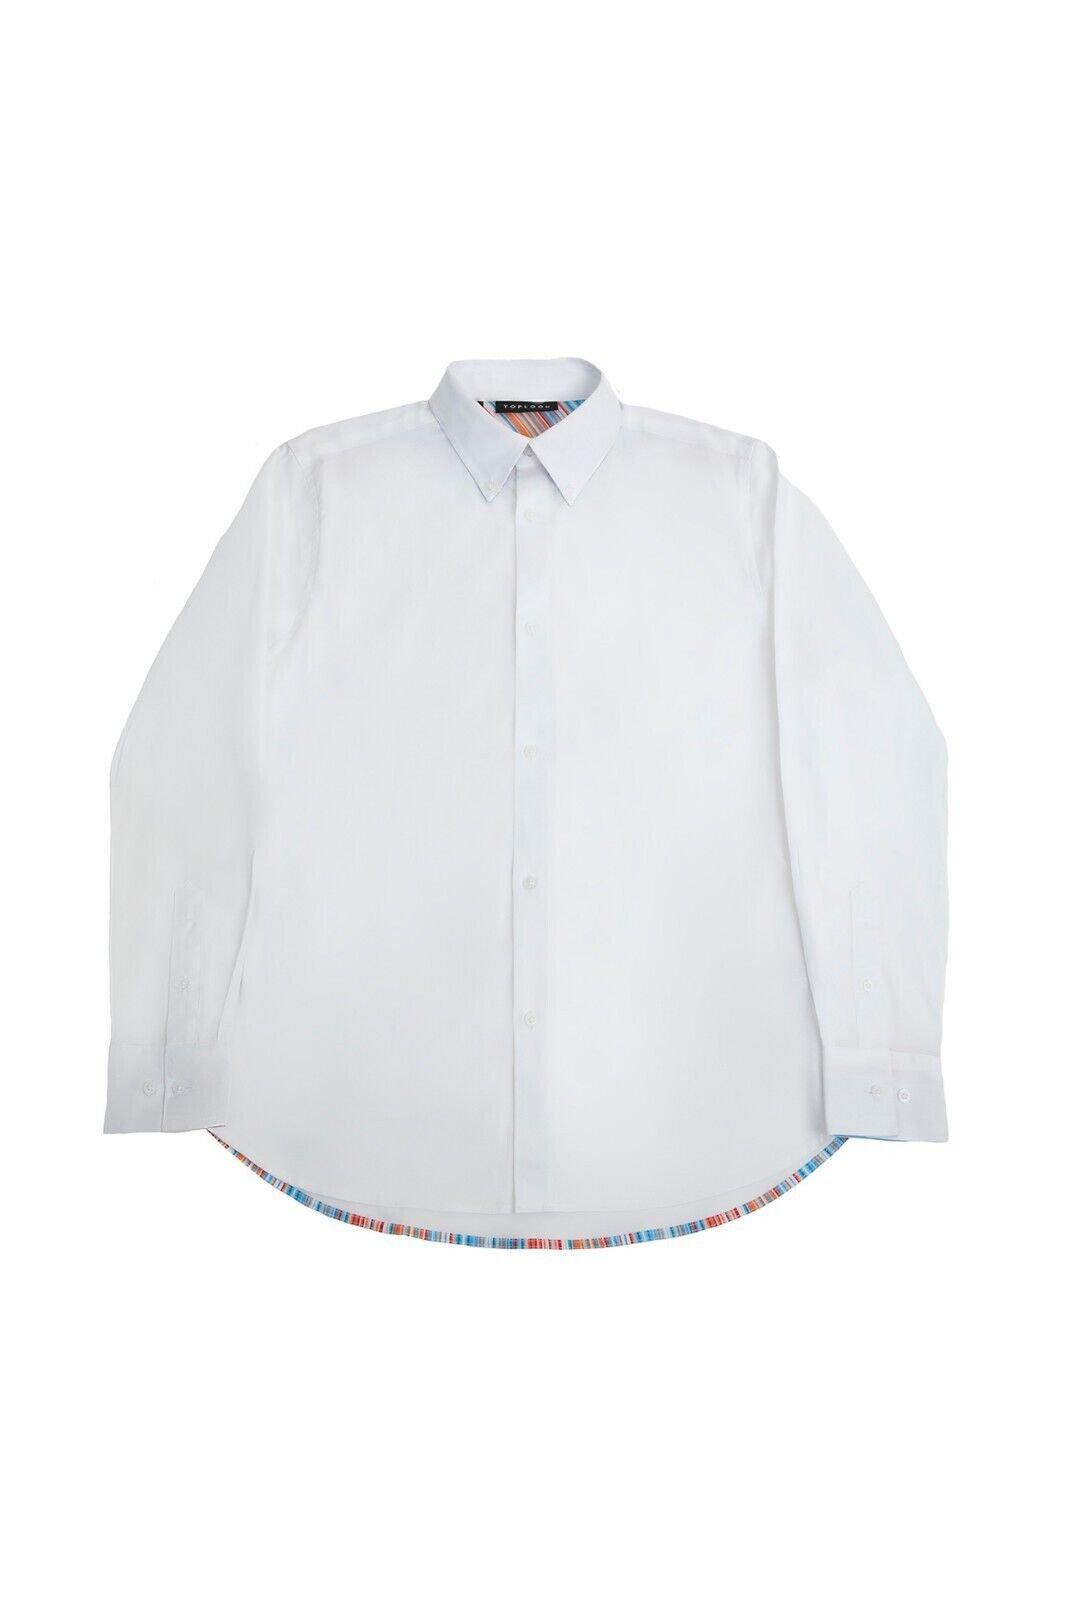 Formal Shirts Long Sleeve, Regular Fit 100% Cotton Business Top for Casual and Office Wear